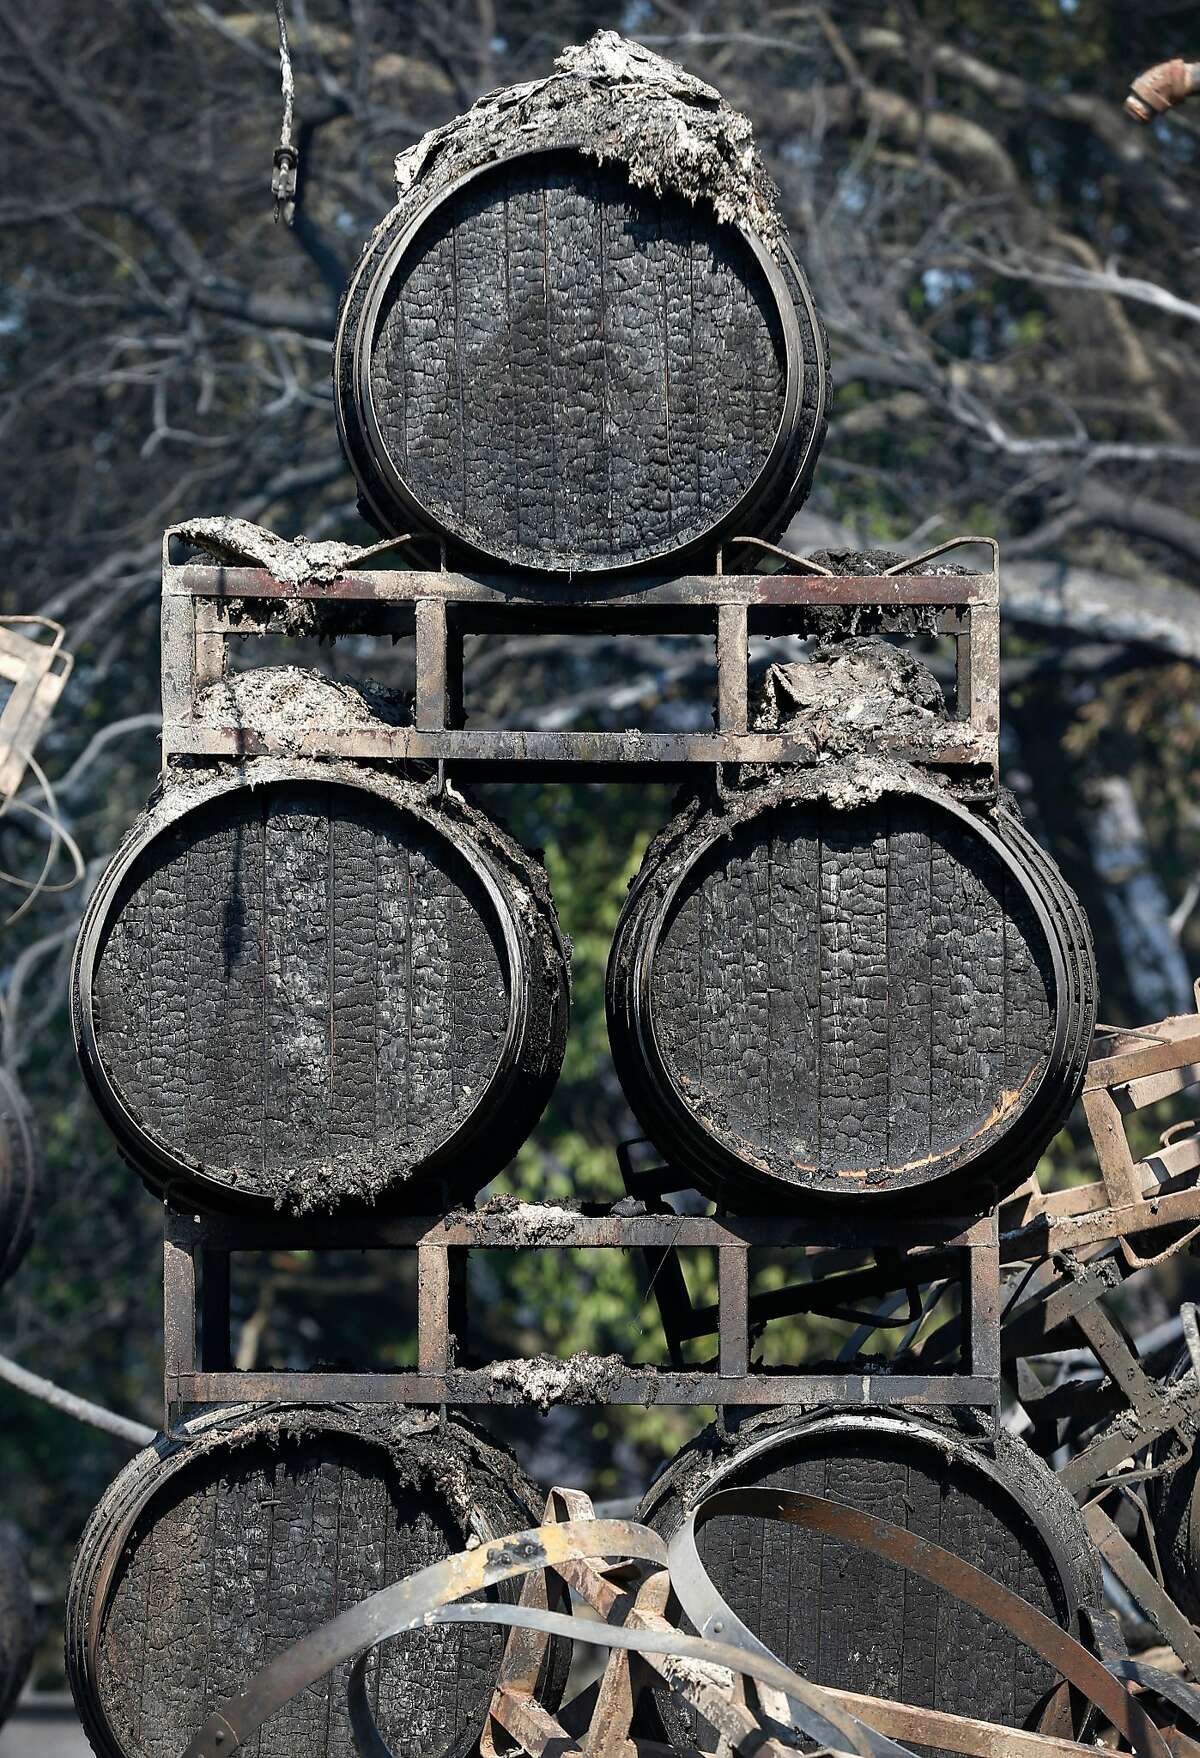 Wine barrels are charred at the Paradise Ridge Winery in Santa Rosa, Calif. on Thursday Oct. 12, 2017 after the Tubbs Fire destroyed the property but spared the vineyards.